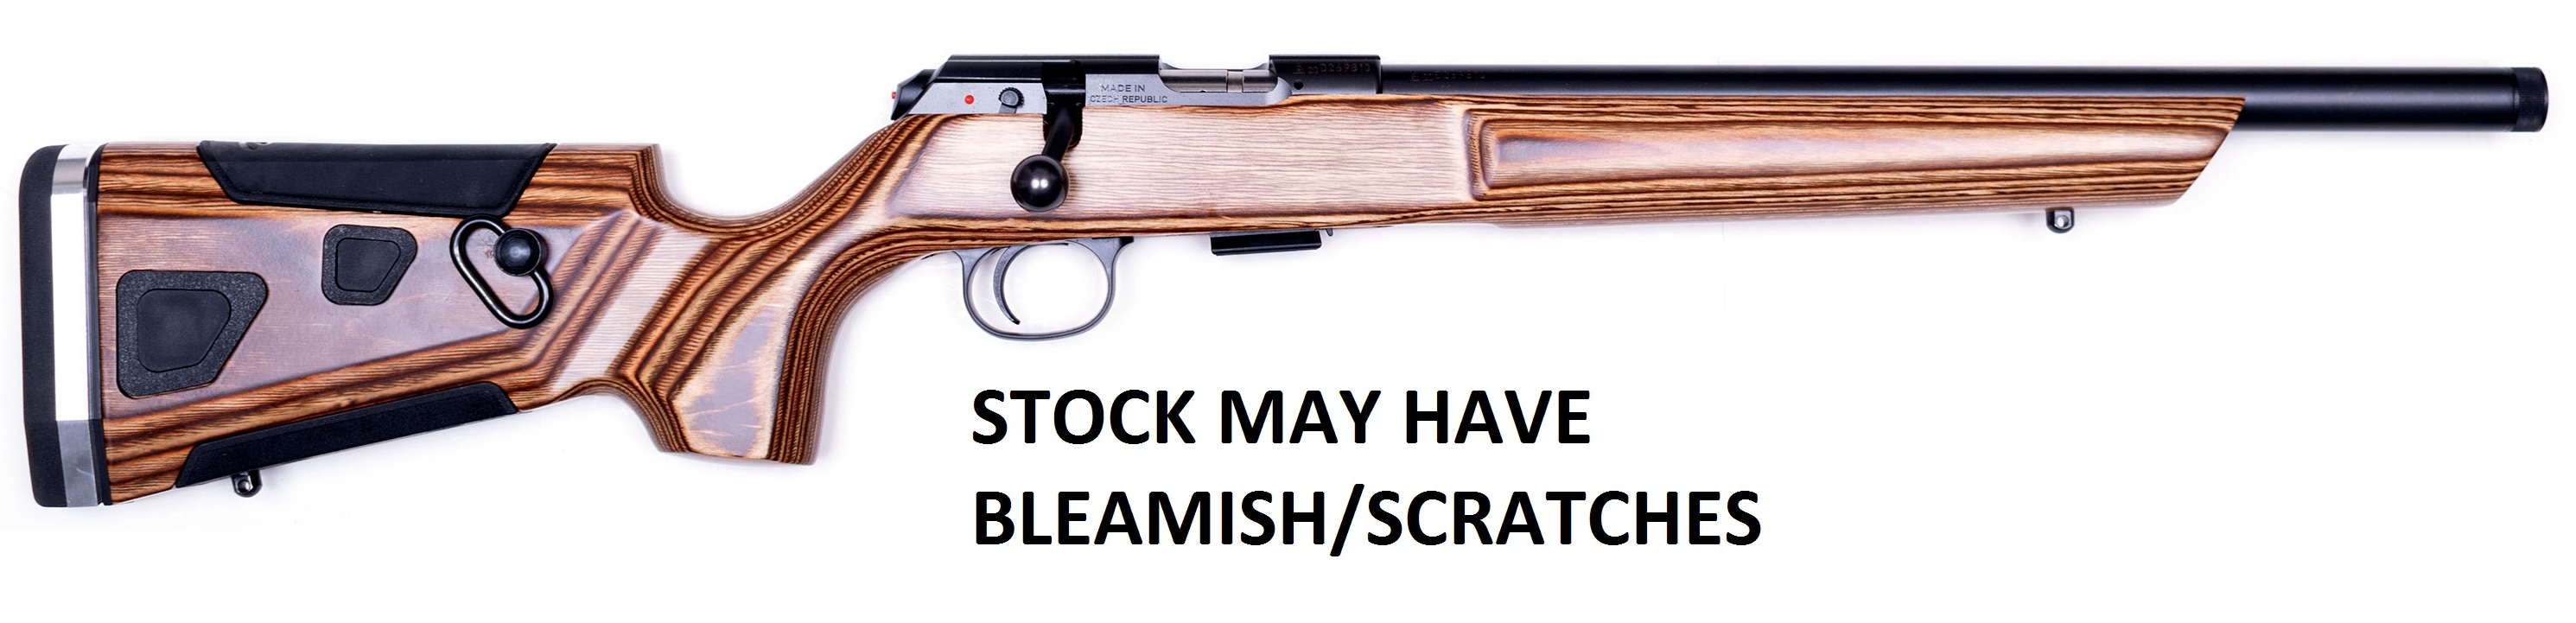 CZ-USA 457 AT-ONE c.22 LR 16.5” BBL BOYDS STOCK HAS BLEAMISH, N-02365BL